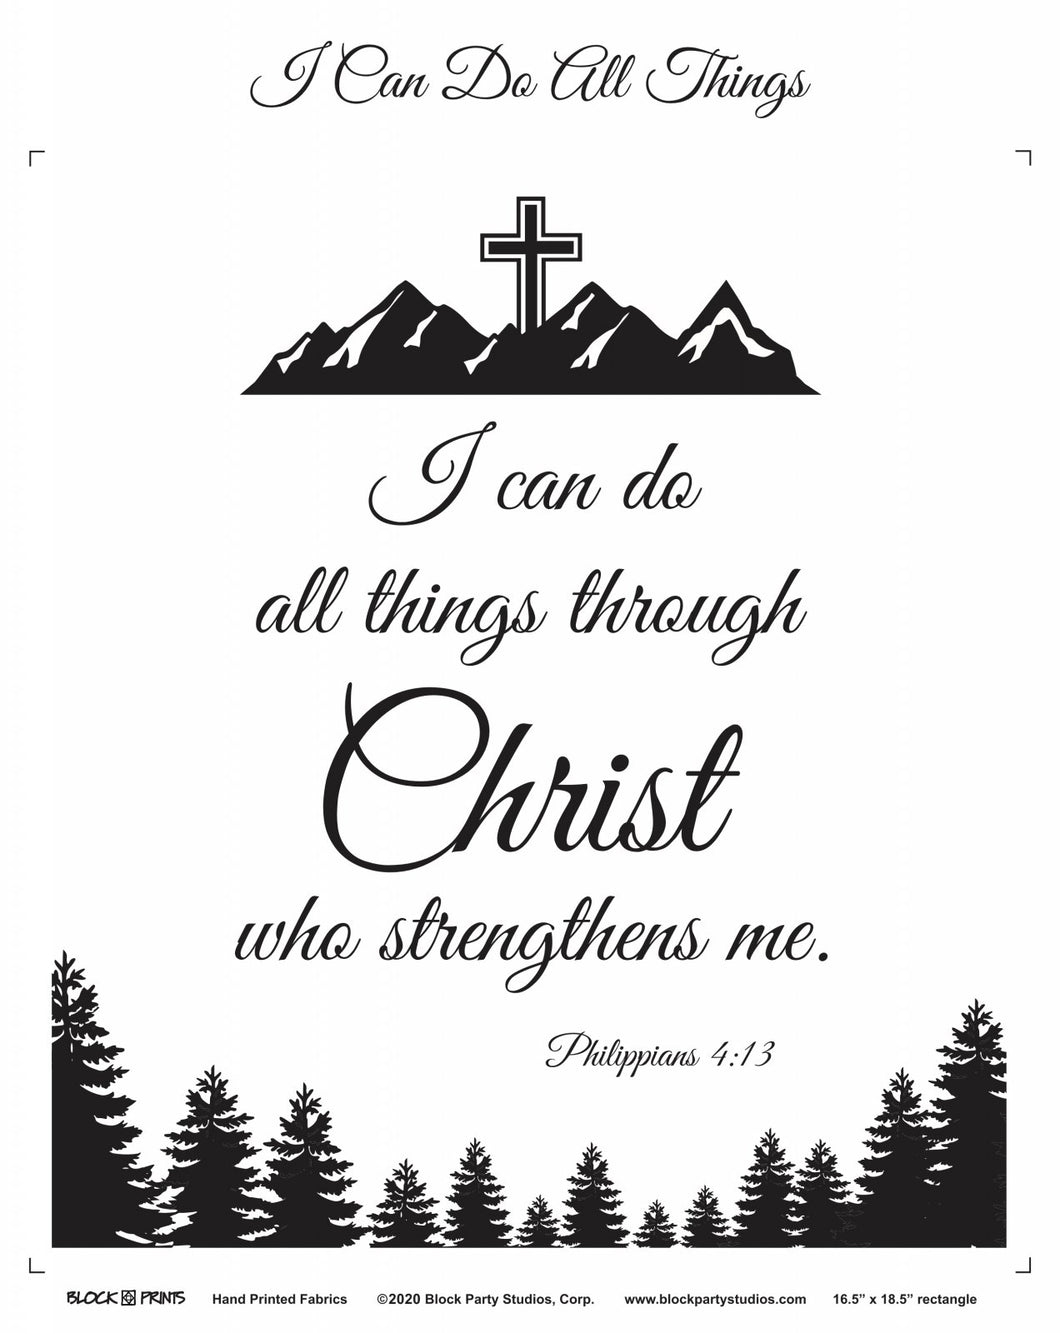 I Can Do All Things Through Christ Philippians 4:13 Fabric Panel